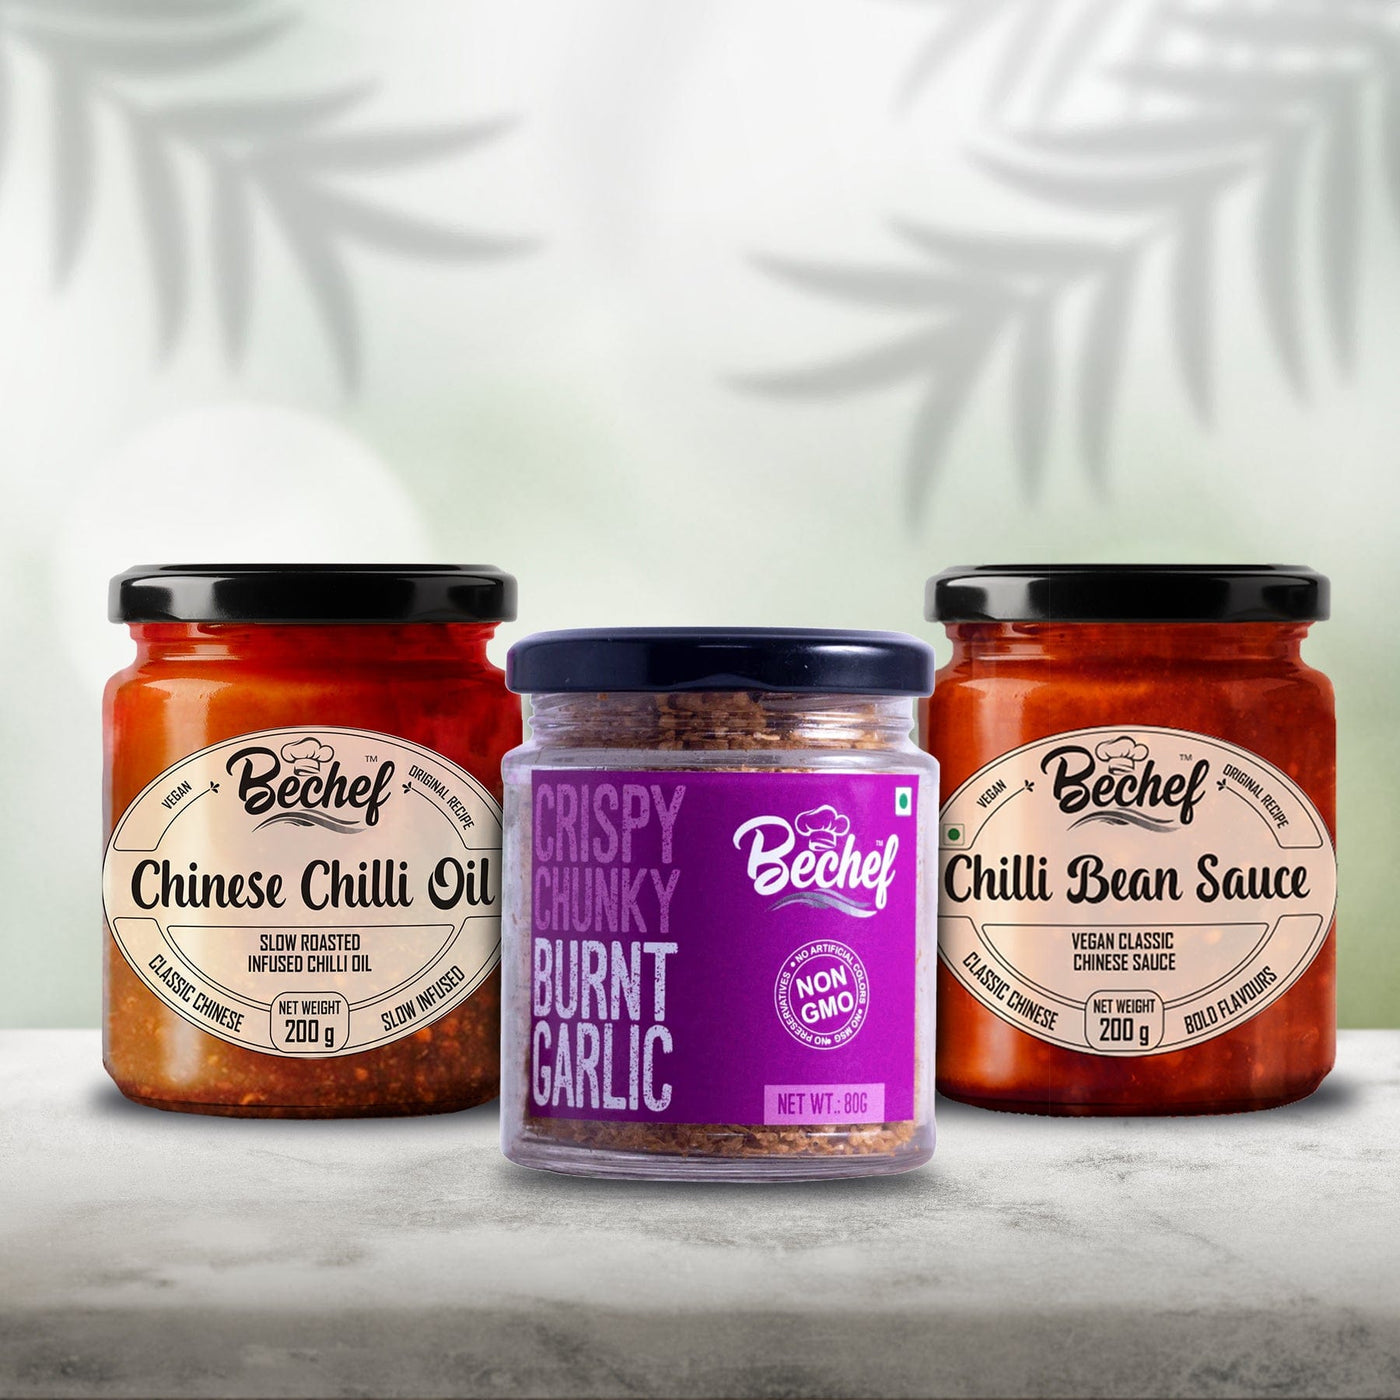 Fiery Chilli Noodles Combo Pack - Bechef - Gourmet Pantry Essentials